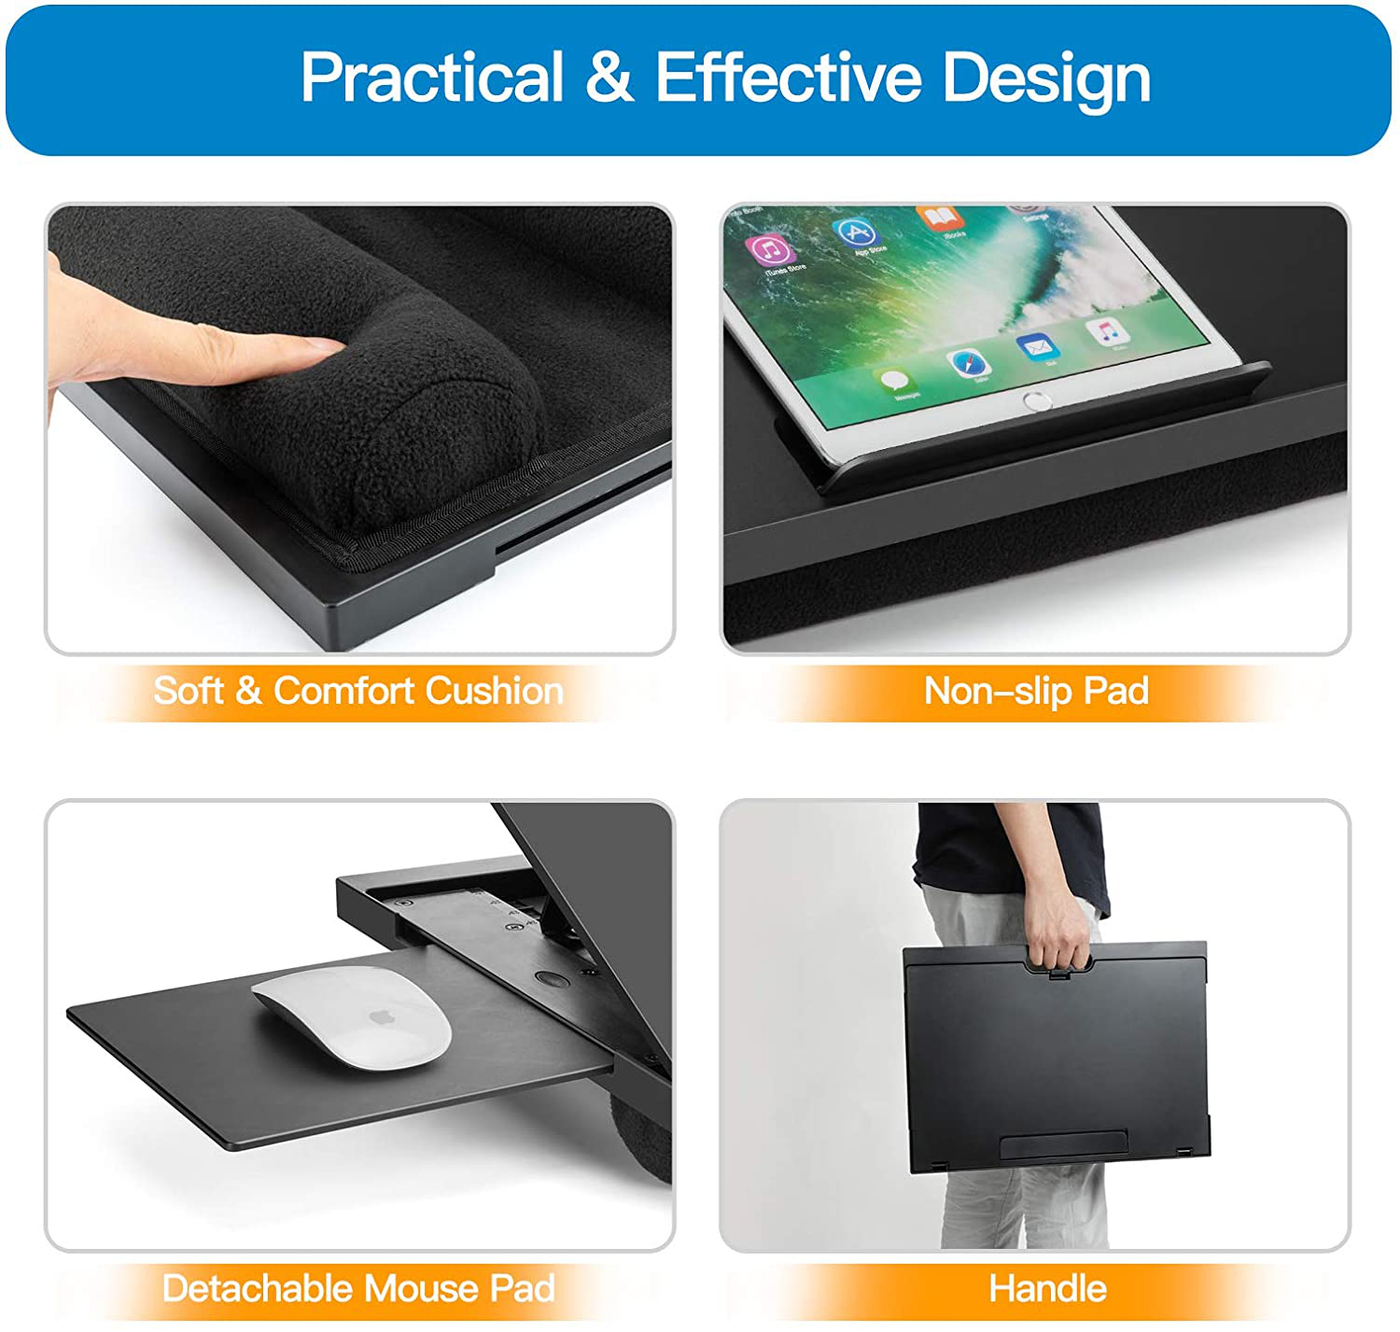 Adjustable Lap Desk - with 6 Adjustable Angles, Detachable Mouse Pad, & Dual Cushions Laptop Stand for Car Laptop Desk, Work Table, Lap Writing Board & Drawing Desk on Sofa or Bed by HUANUO